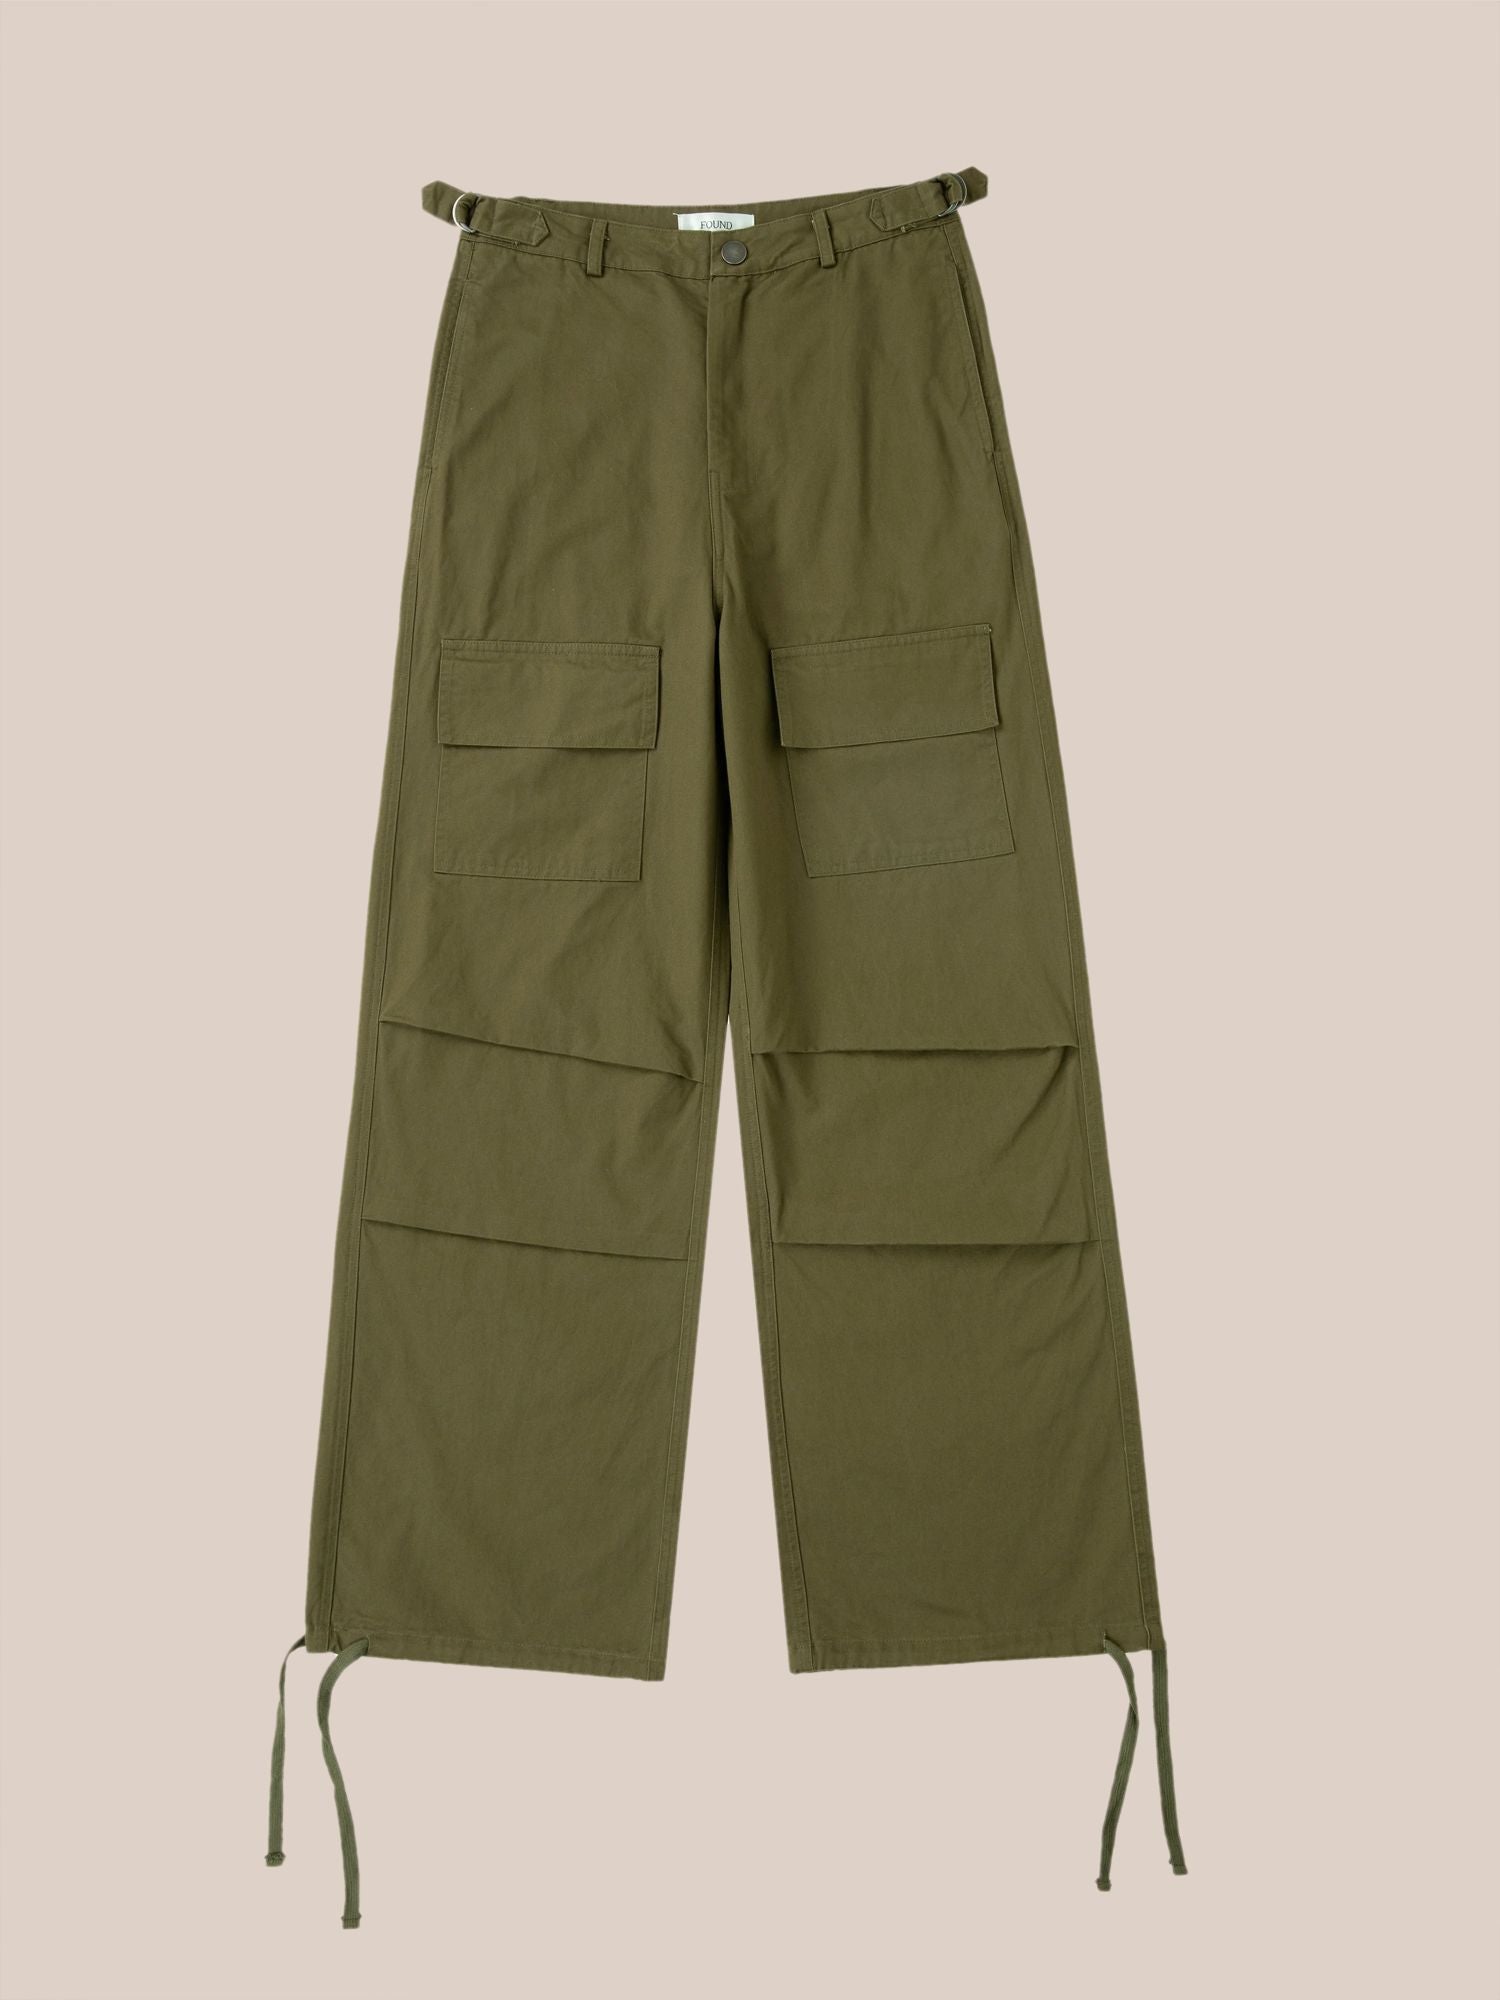 Olive green Found parachute cargo twill pants with multiple pockets and drawstrings at the ankles against a pink background.